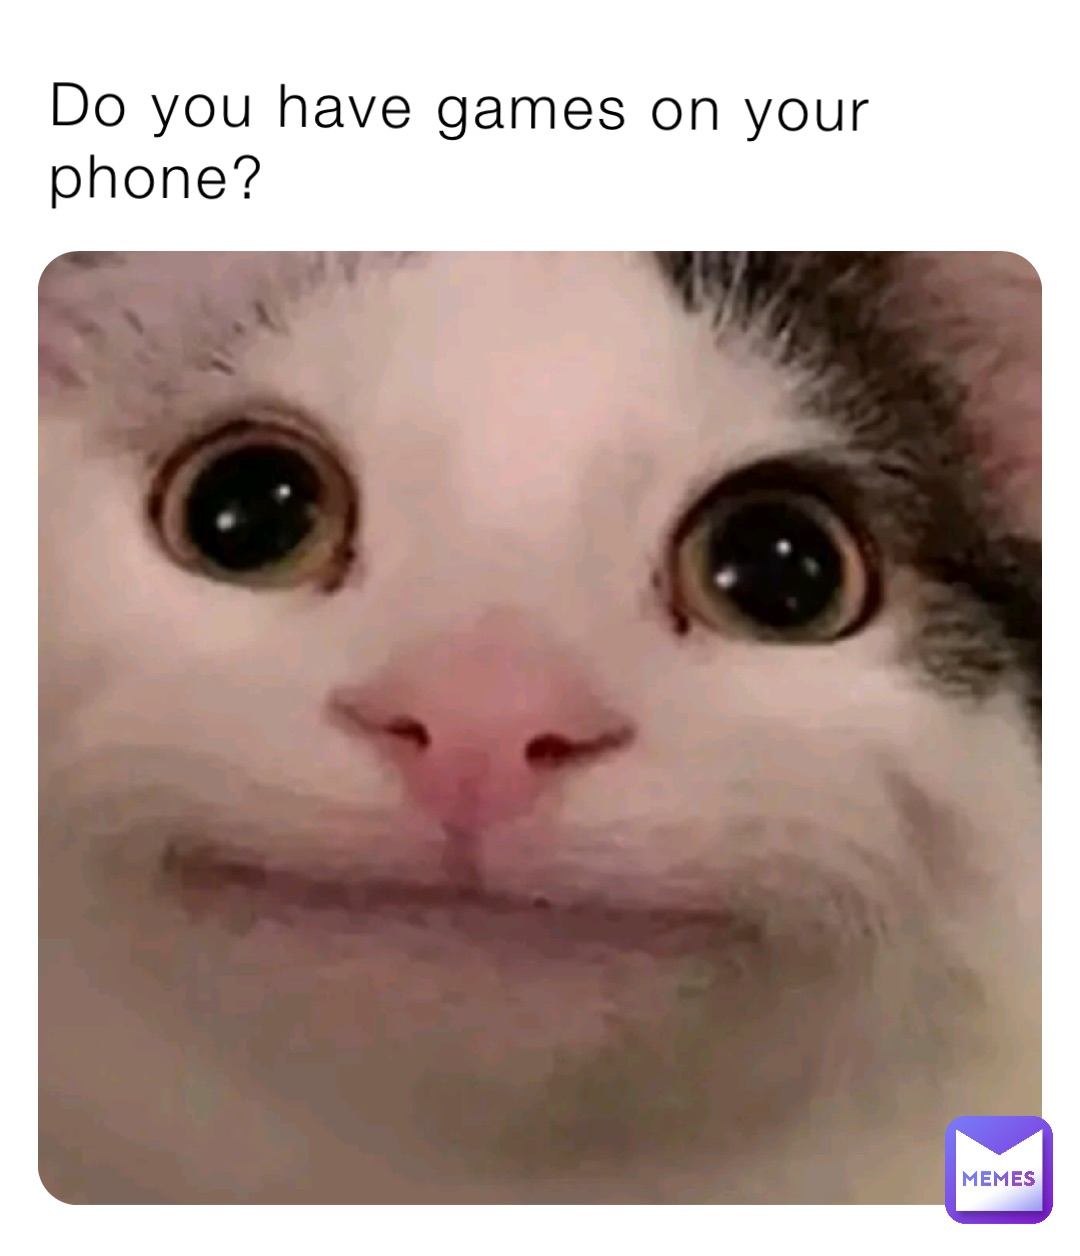 Do you have games on your phone?